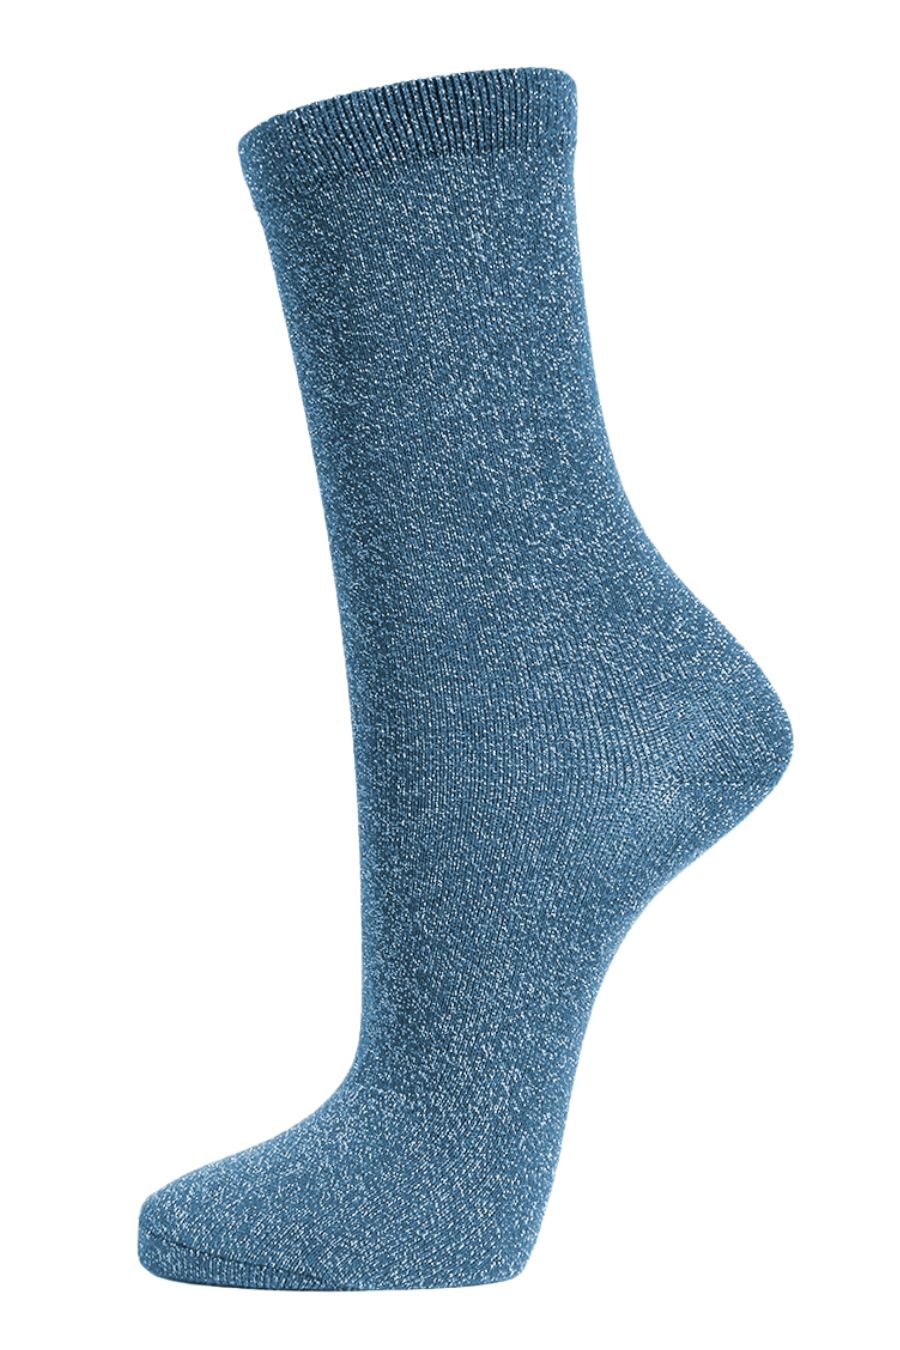 denim blue ankle socks with an all over silver glitter shimmer